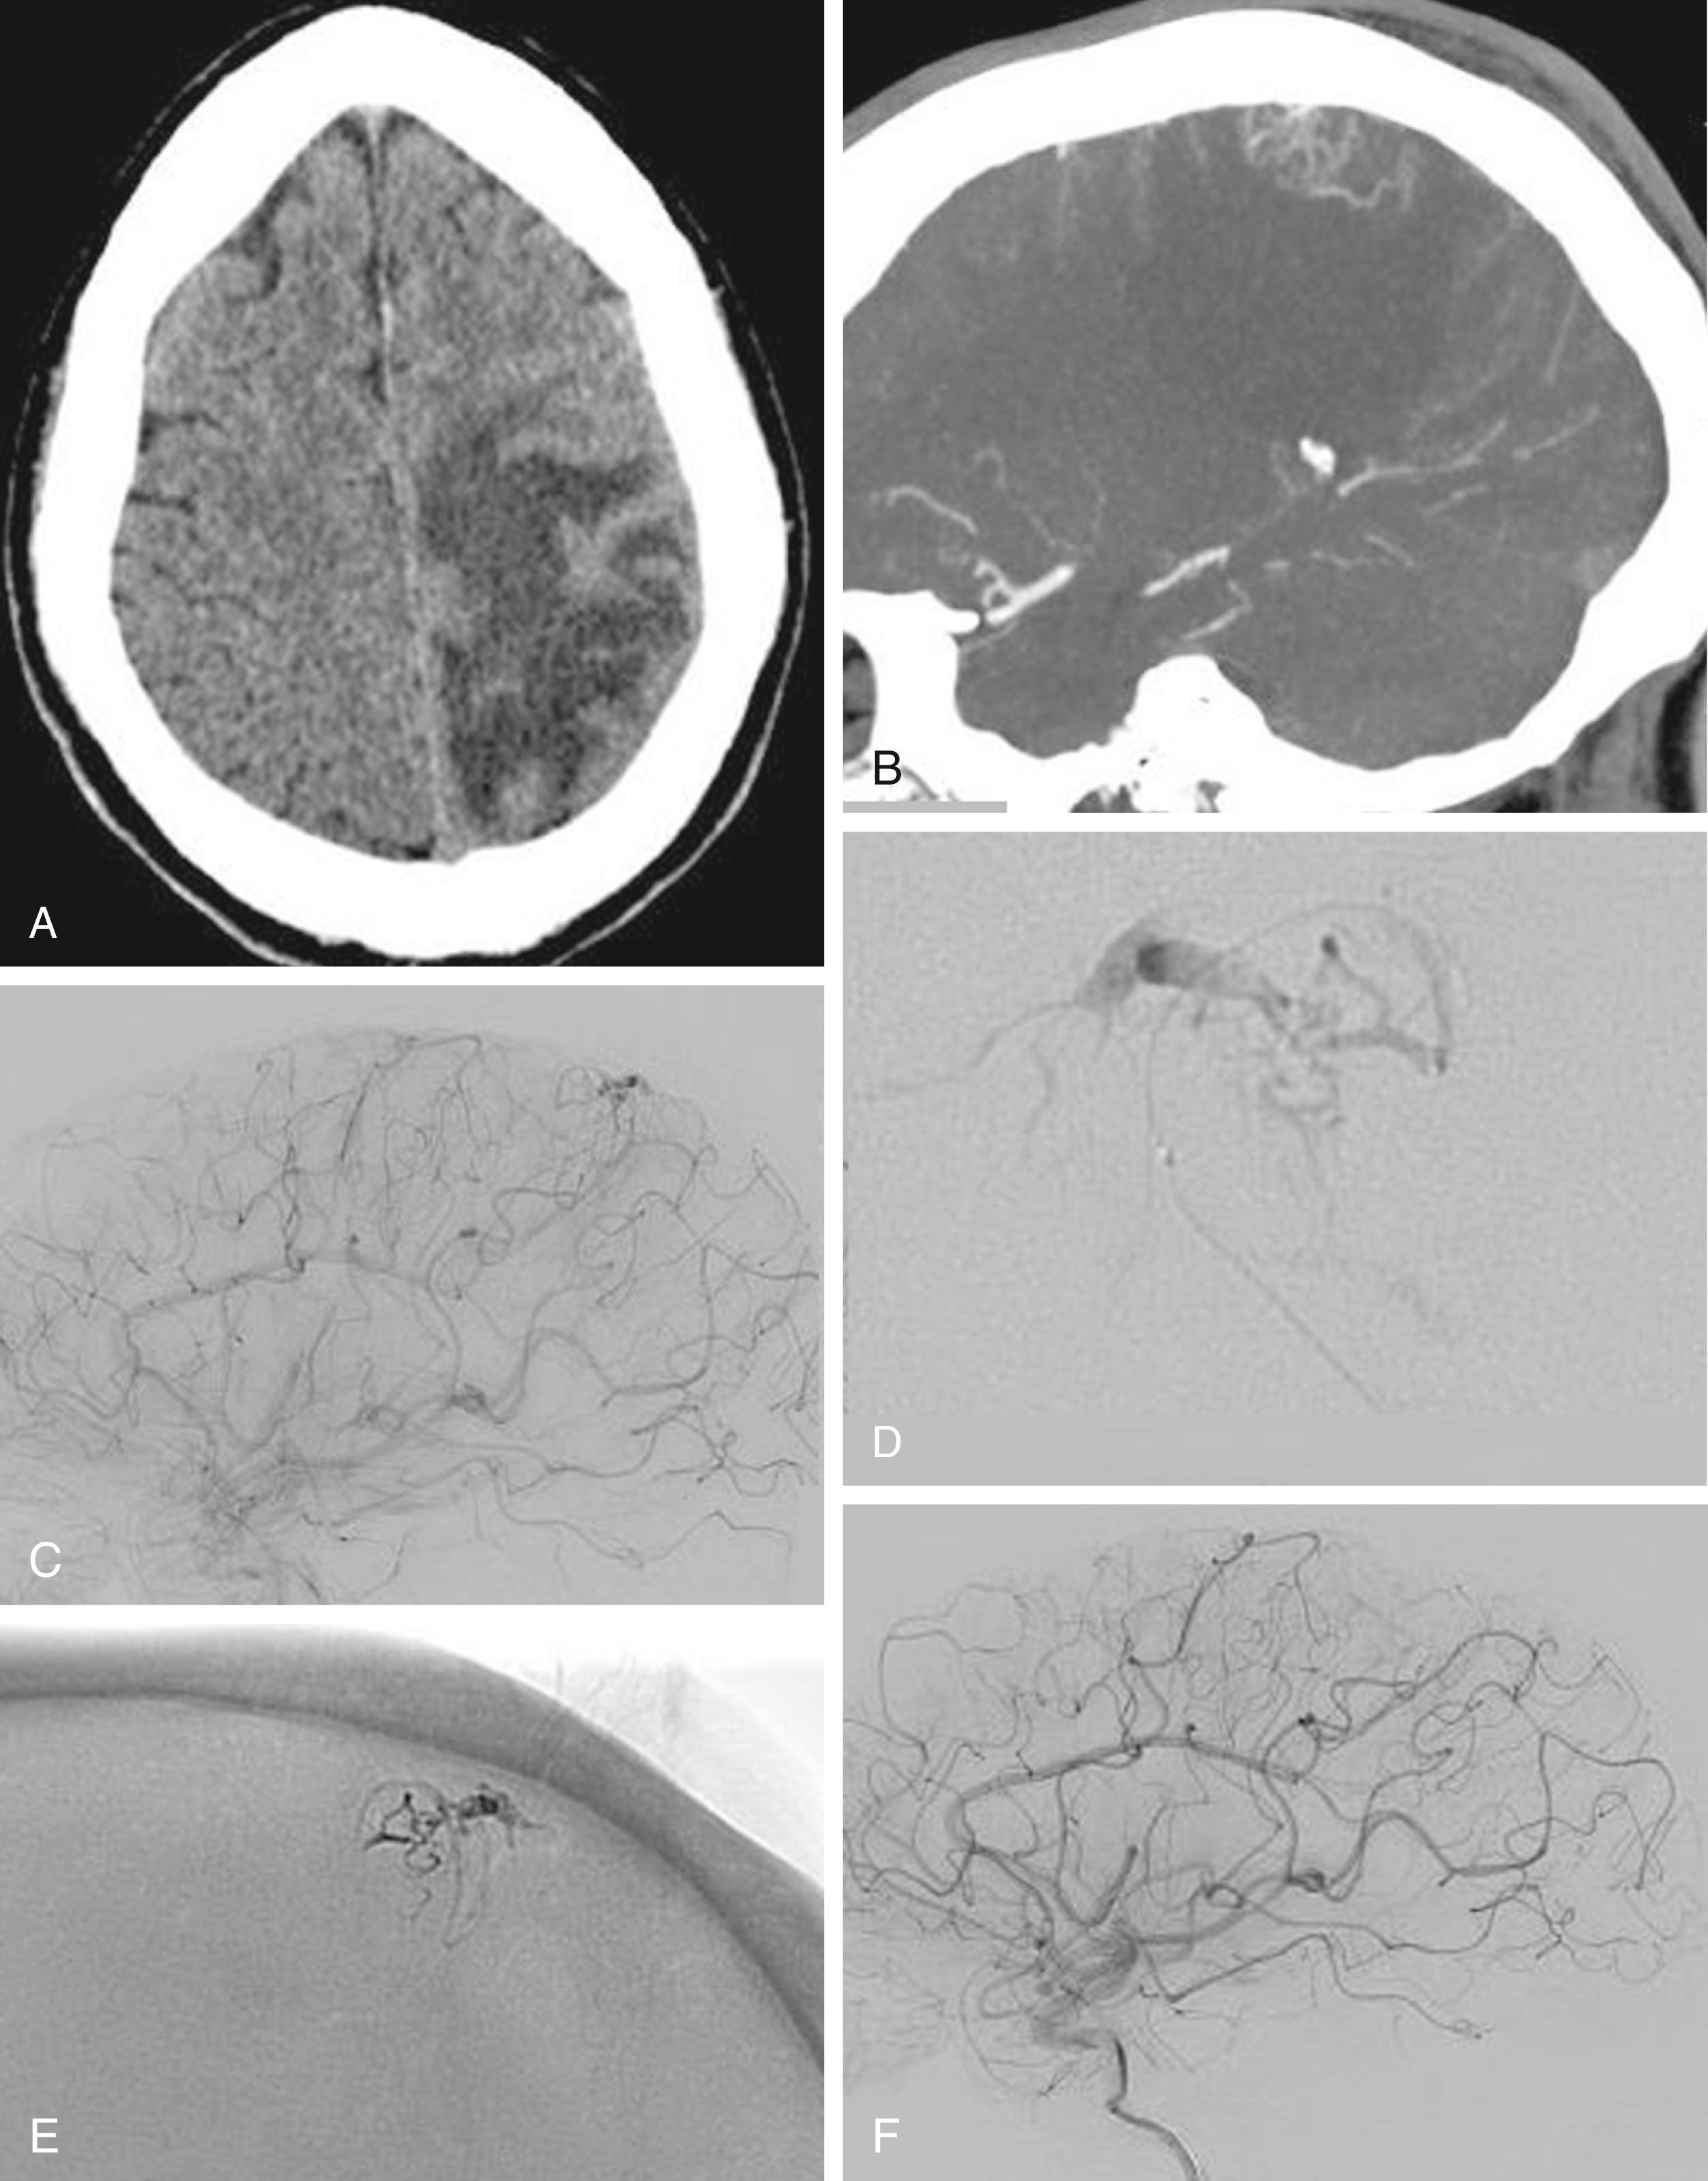 Fig. 69.3, Venous congestion and treatment. Despite being a non-ruptured arteriovenous malformation (AVM), the progressive venous stenosis, we feel, may predispose this patient toward a more malignant course. In this situation, we felt treatment of this non-ruptured AVM was warranted. (A) Axial noncontrast and (B) sagittal postcontrast maximal intensity projection computed tomography showing severe left frontoparietal edema secondary to a non-ruptured AVM. (C) Left internal carotid artery (ICA) injection, lateral view, showing the small left parietal AVM. (D) Magnified view of a microcatheter injection during treatment, showing a thrombosed draining vein. (E) Post-embolization radiograph showing the glue cast obliterating the AVM nidus. (F) Post-treatment left ICA lateral angiogram, showing complete obliteration of the AVM.